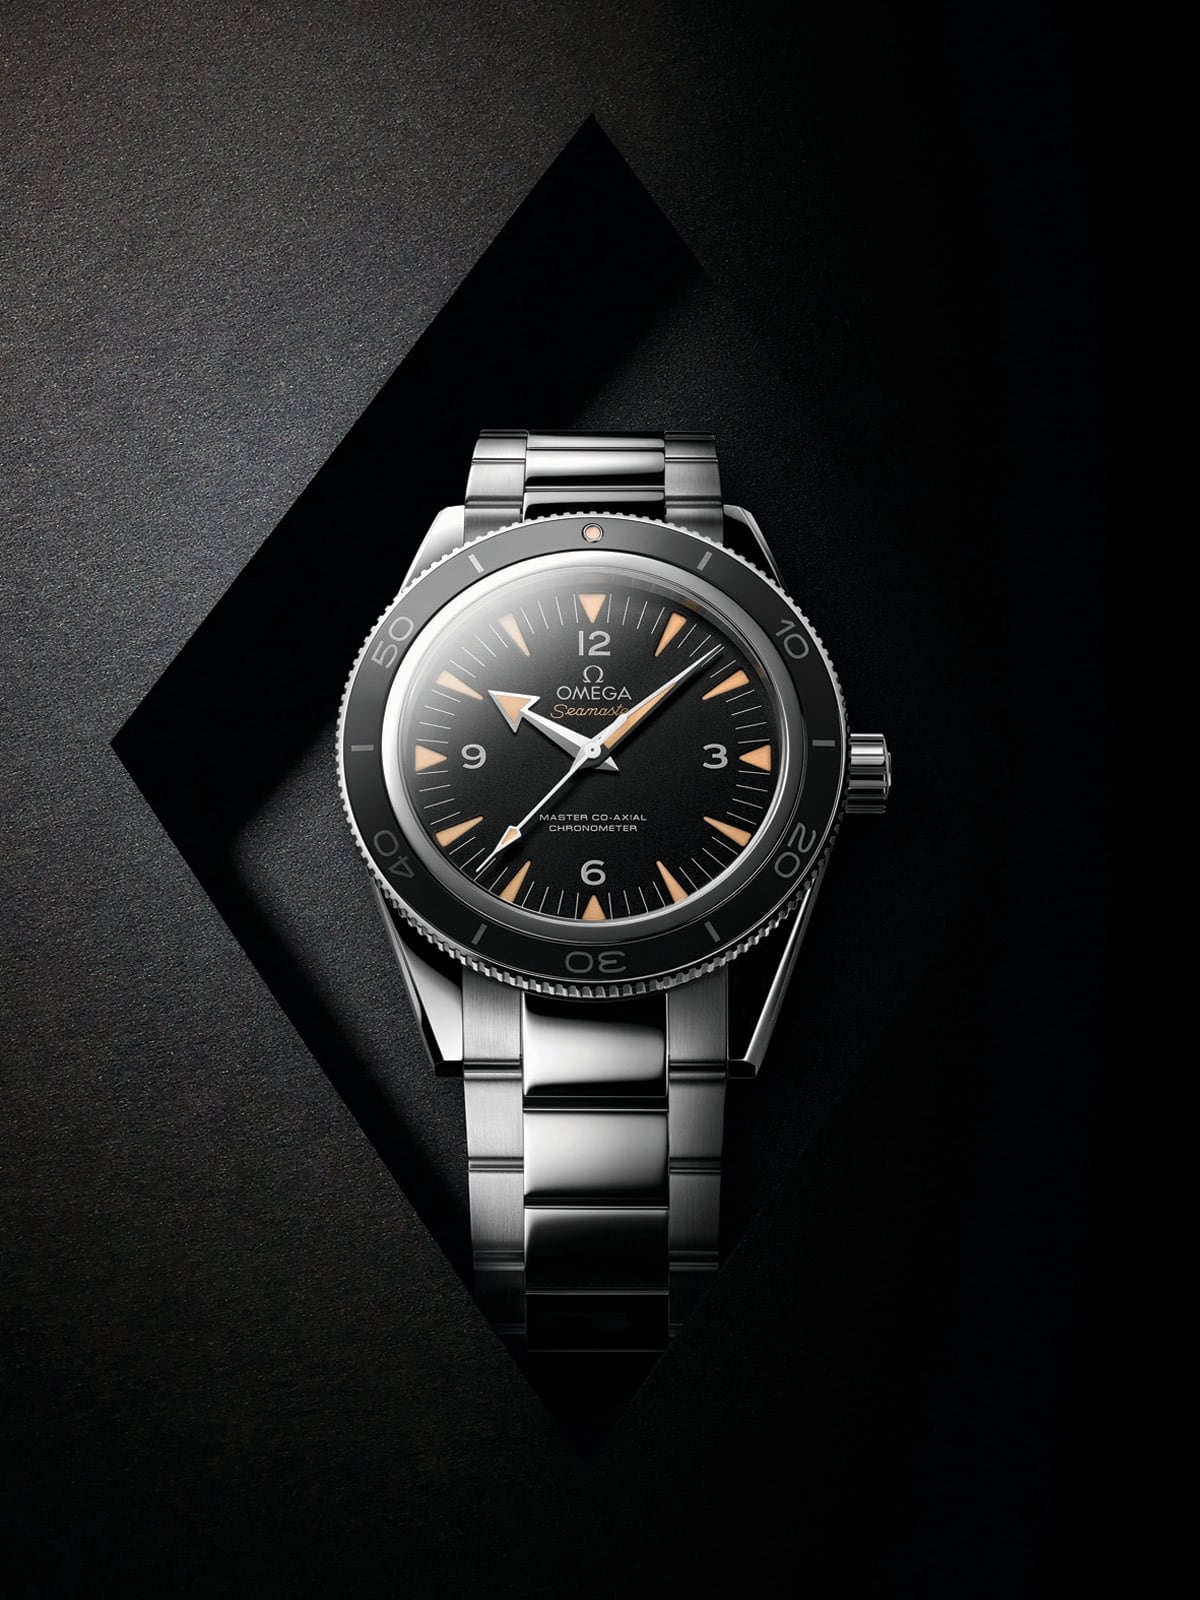 Best Replica Watch Sites Rated